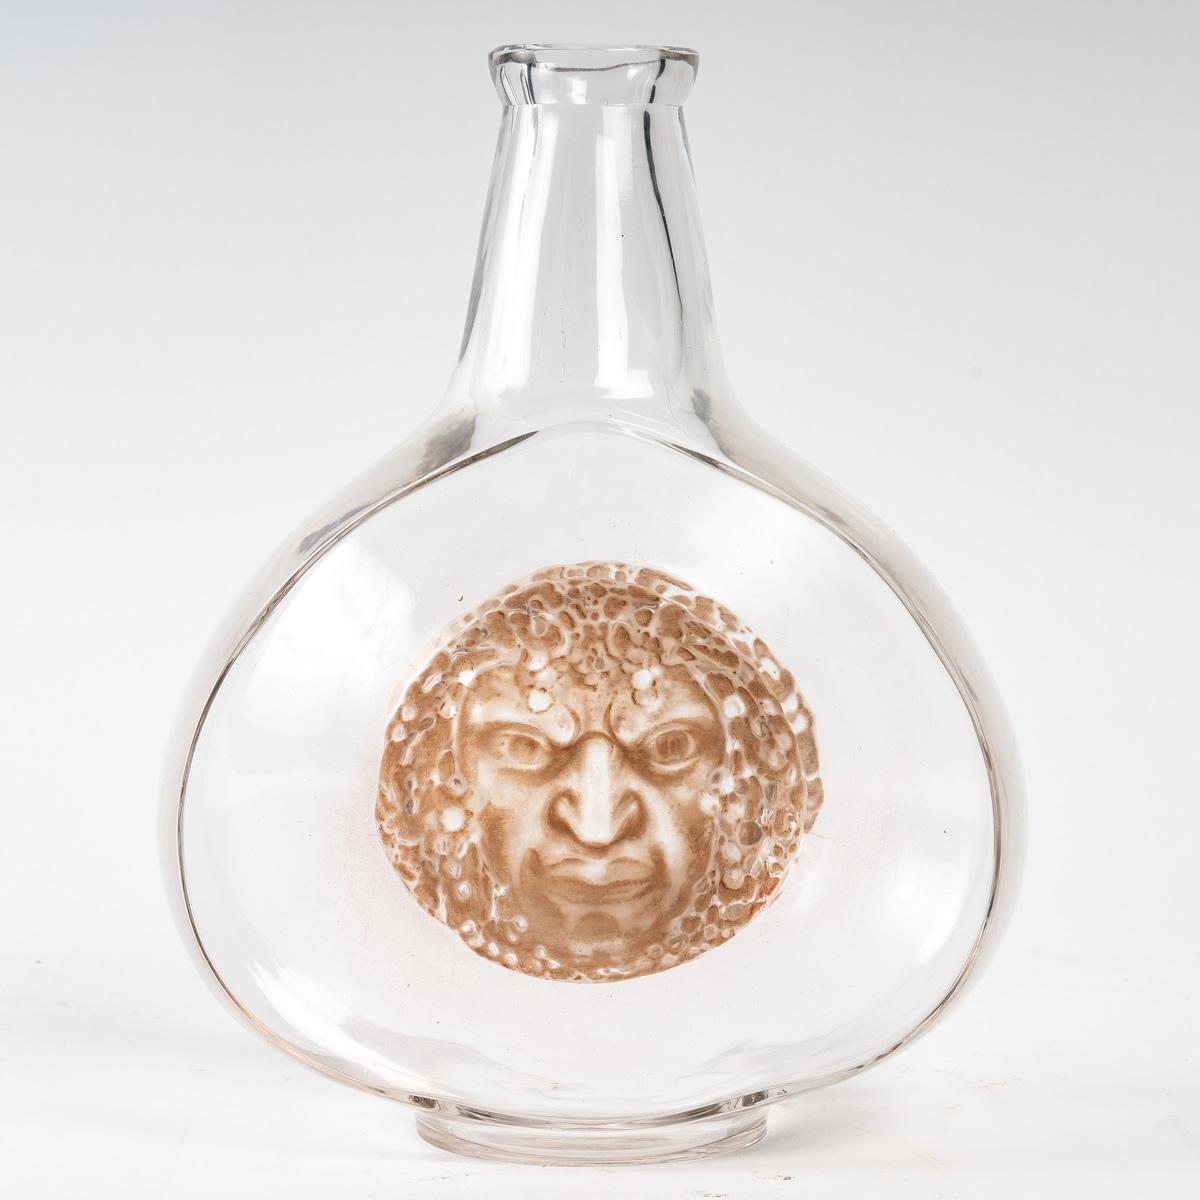 Molded 1913 René Lalique, Decanter Masques Clear Glass with Sepia Patina